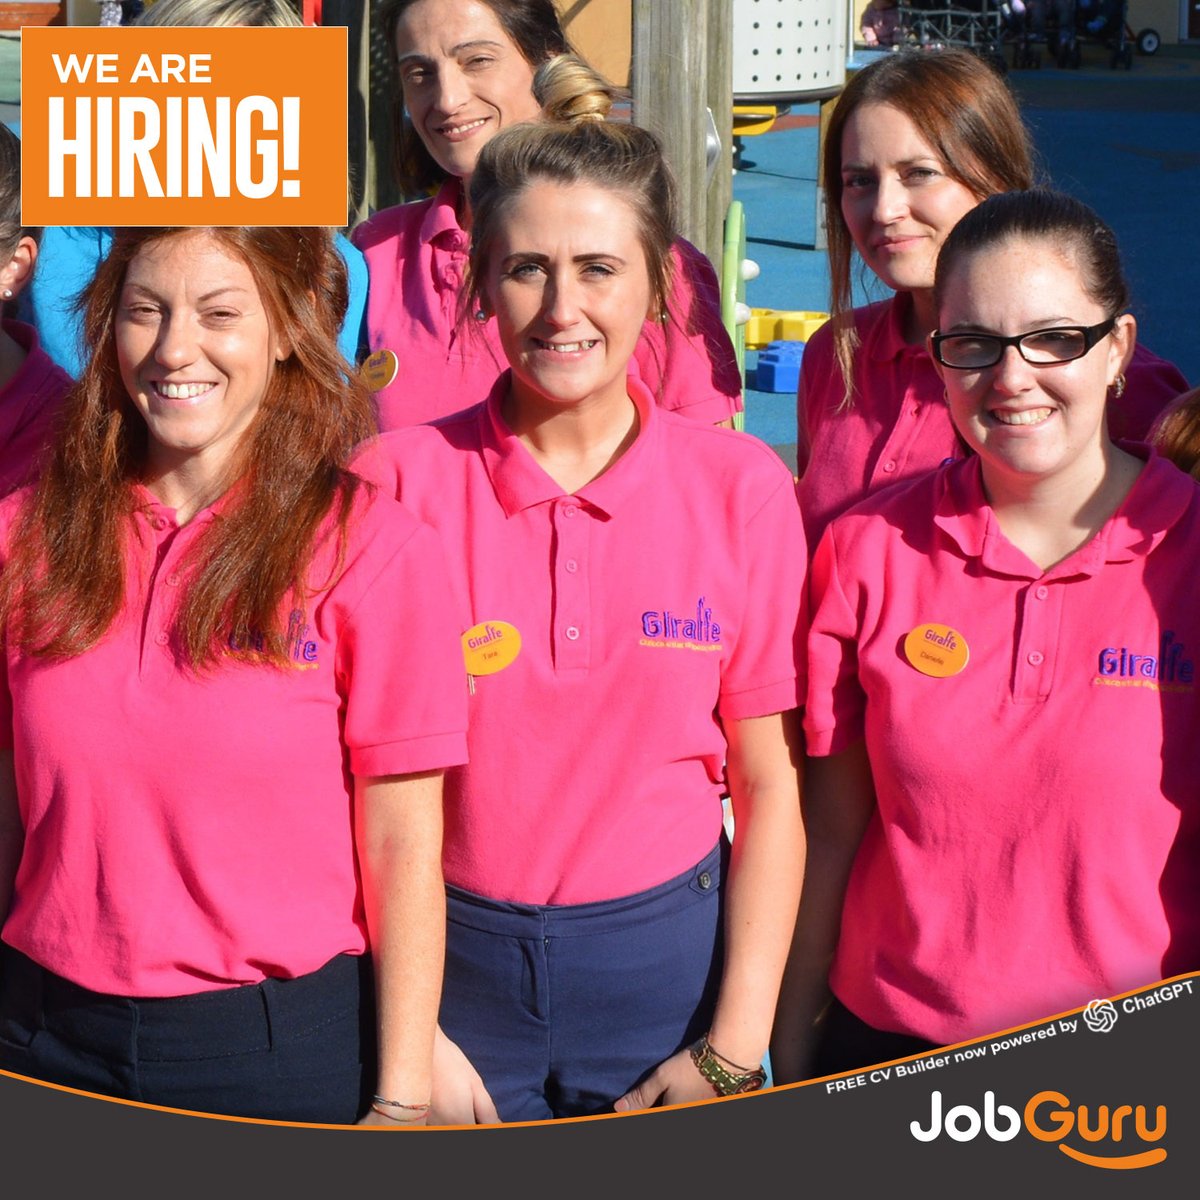 👶🏼✨ Join us at Giraffe Childcare for our Childcare Practitioner Interview Day on March 15th in Dublin! Explore exciting opportunities with job security, career progression, and employee benefits. #ChildcareJobs #DublinCareers 🌟🎈jobguru.ie/vacancy/childc…